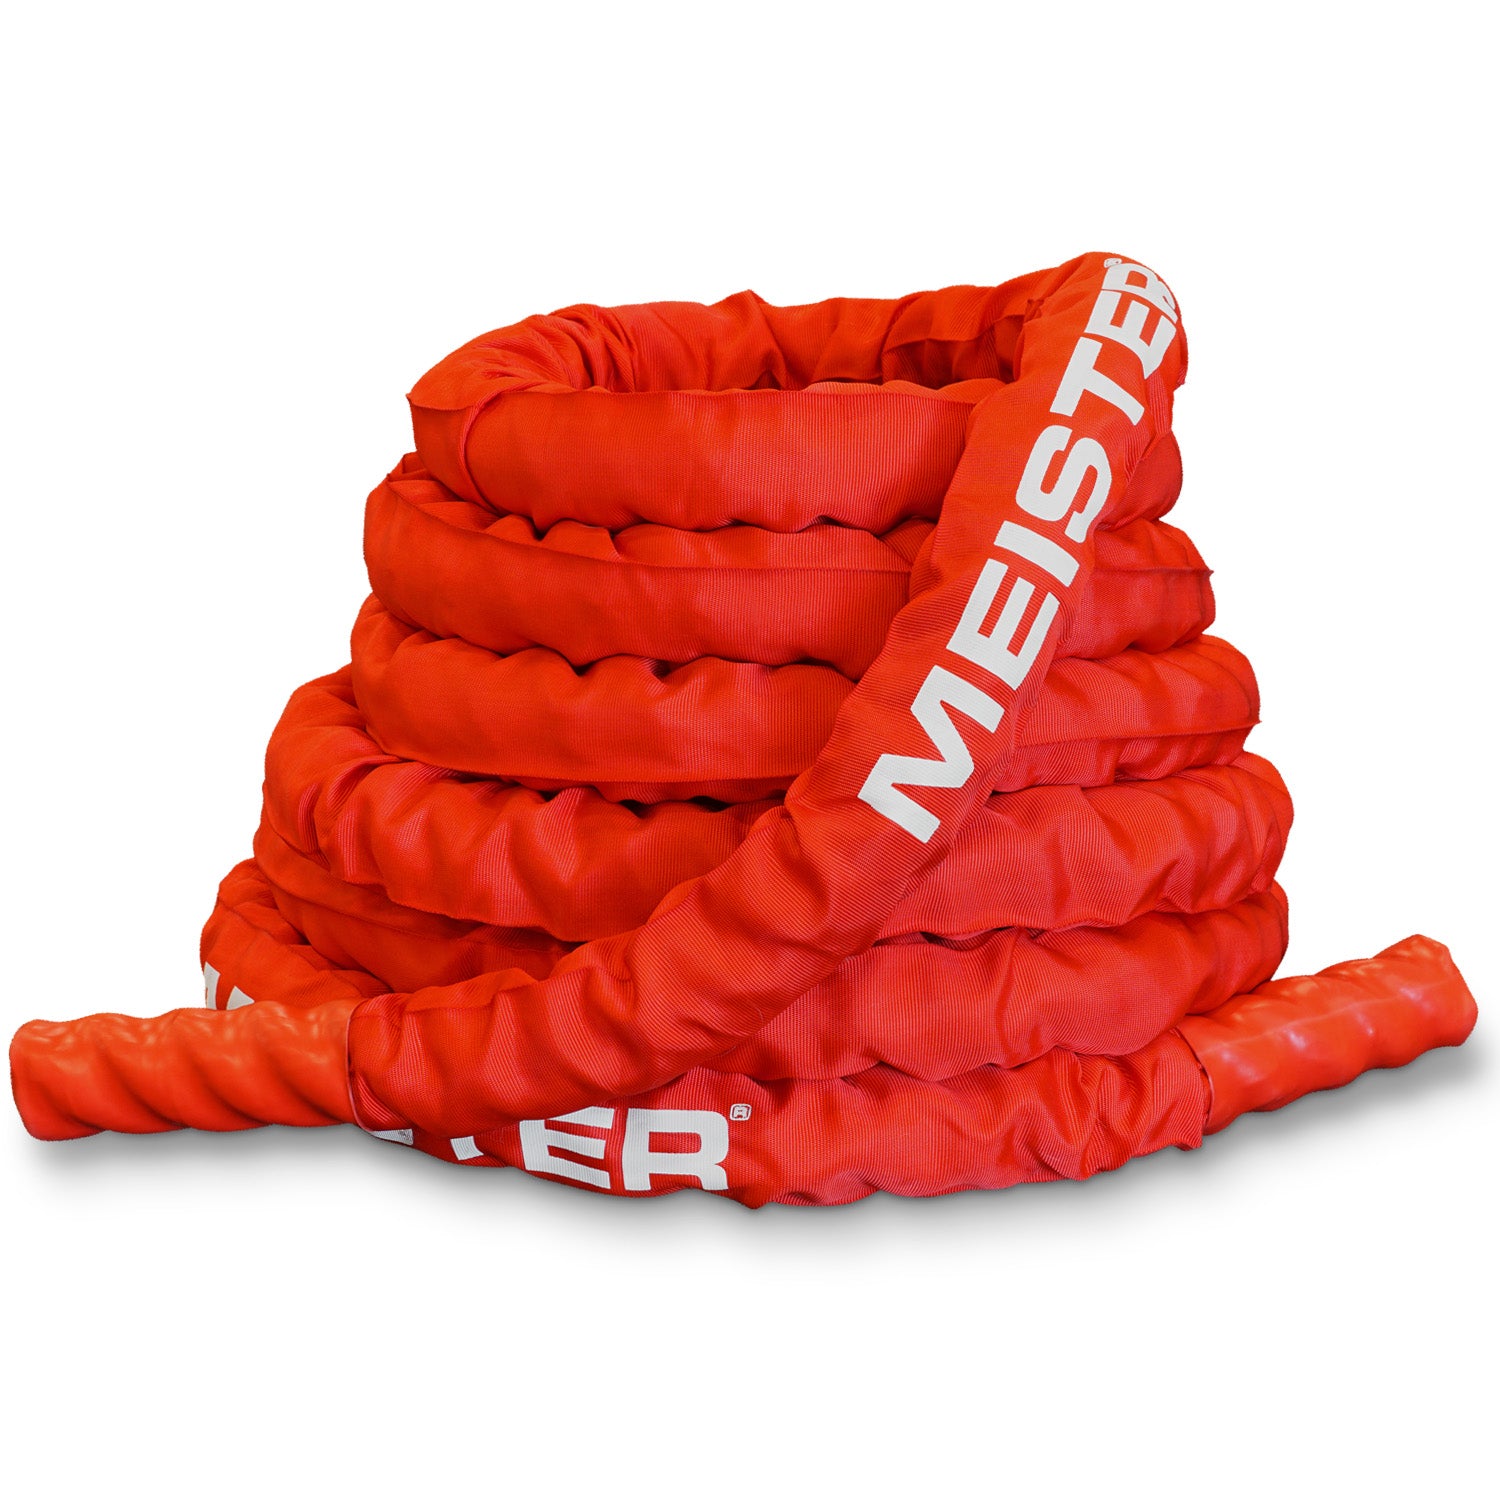 Meister Beast Professional Sheathed Battle Rope for Strength & Conditioning Gym Workouts - 2.5 Diameter - Red